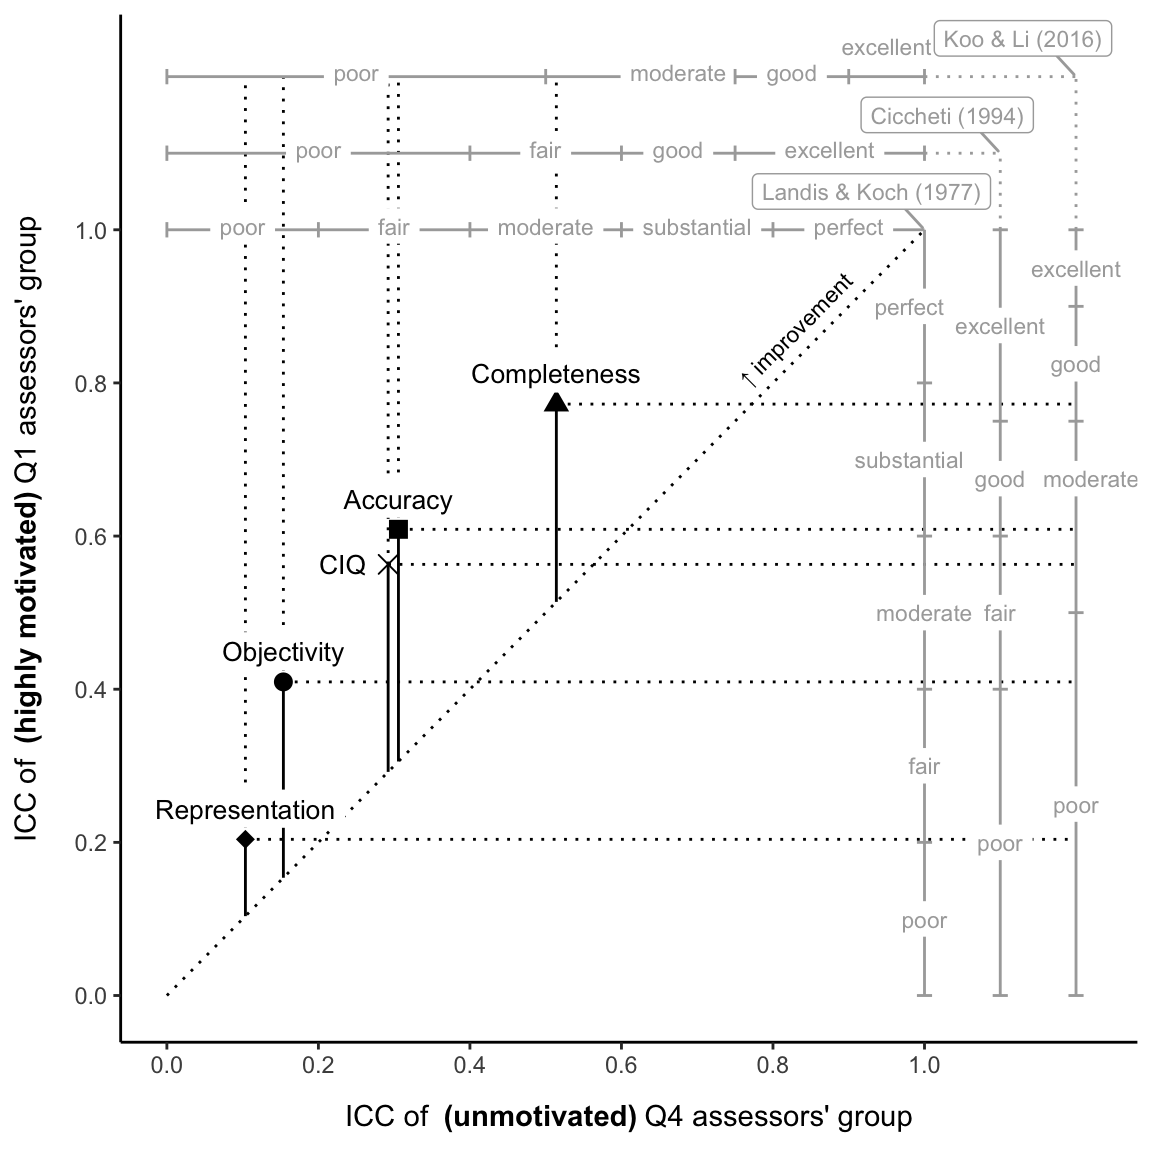 Comparing inter-rater agreement for IQ dimensions in terms of motivation by assessors’ groups. The dual-scale data chart depicts the relationship between ICC values and various interpretations of inter-rater agreement. It compares the four IQ dimensions in terms of the extent to which motivation affected the increase in inter-rater agreement. The bottom x-axis denotes ICC for unmotivated users (Q4), while the left y-axis represents ICC values for highly motivated users (Q1). The scales on top of the x-axis and right of the y-axis denote various ICC interpretations for unmotivated (Q4) and motivated (Q1) users, respectively. The figure depicts all IQ dimensions and the mean value of the aforementioned dimensions. ICC values above the identity line (i.e. the dotted diagonal) represent an increase in ICC, while values below represent a decrease in ICC, when comparing unmotivated (Q4) and motivated (Q1) groups.